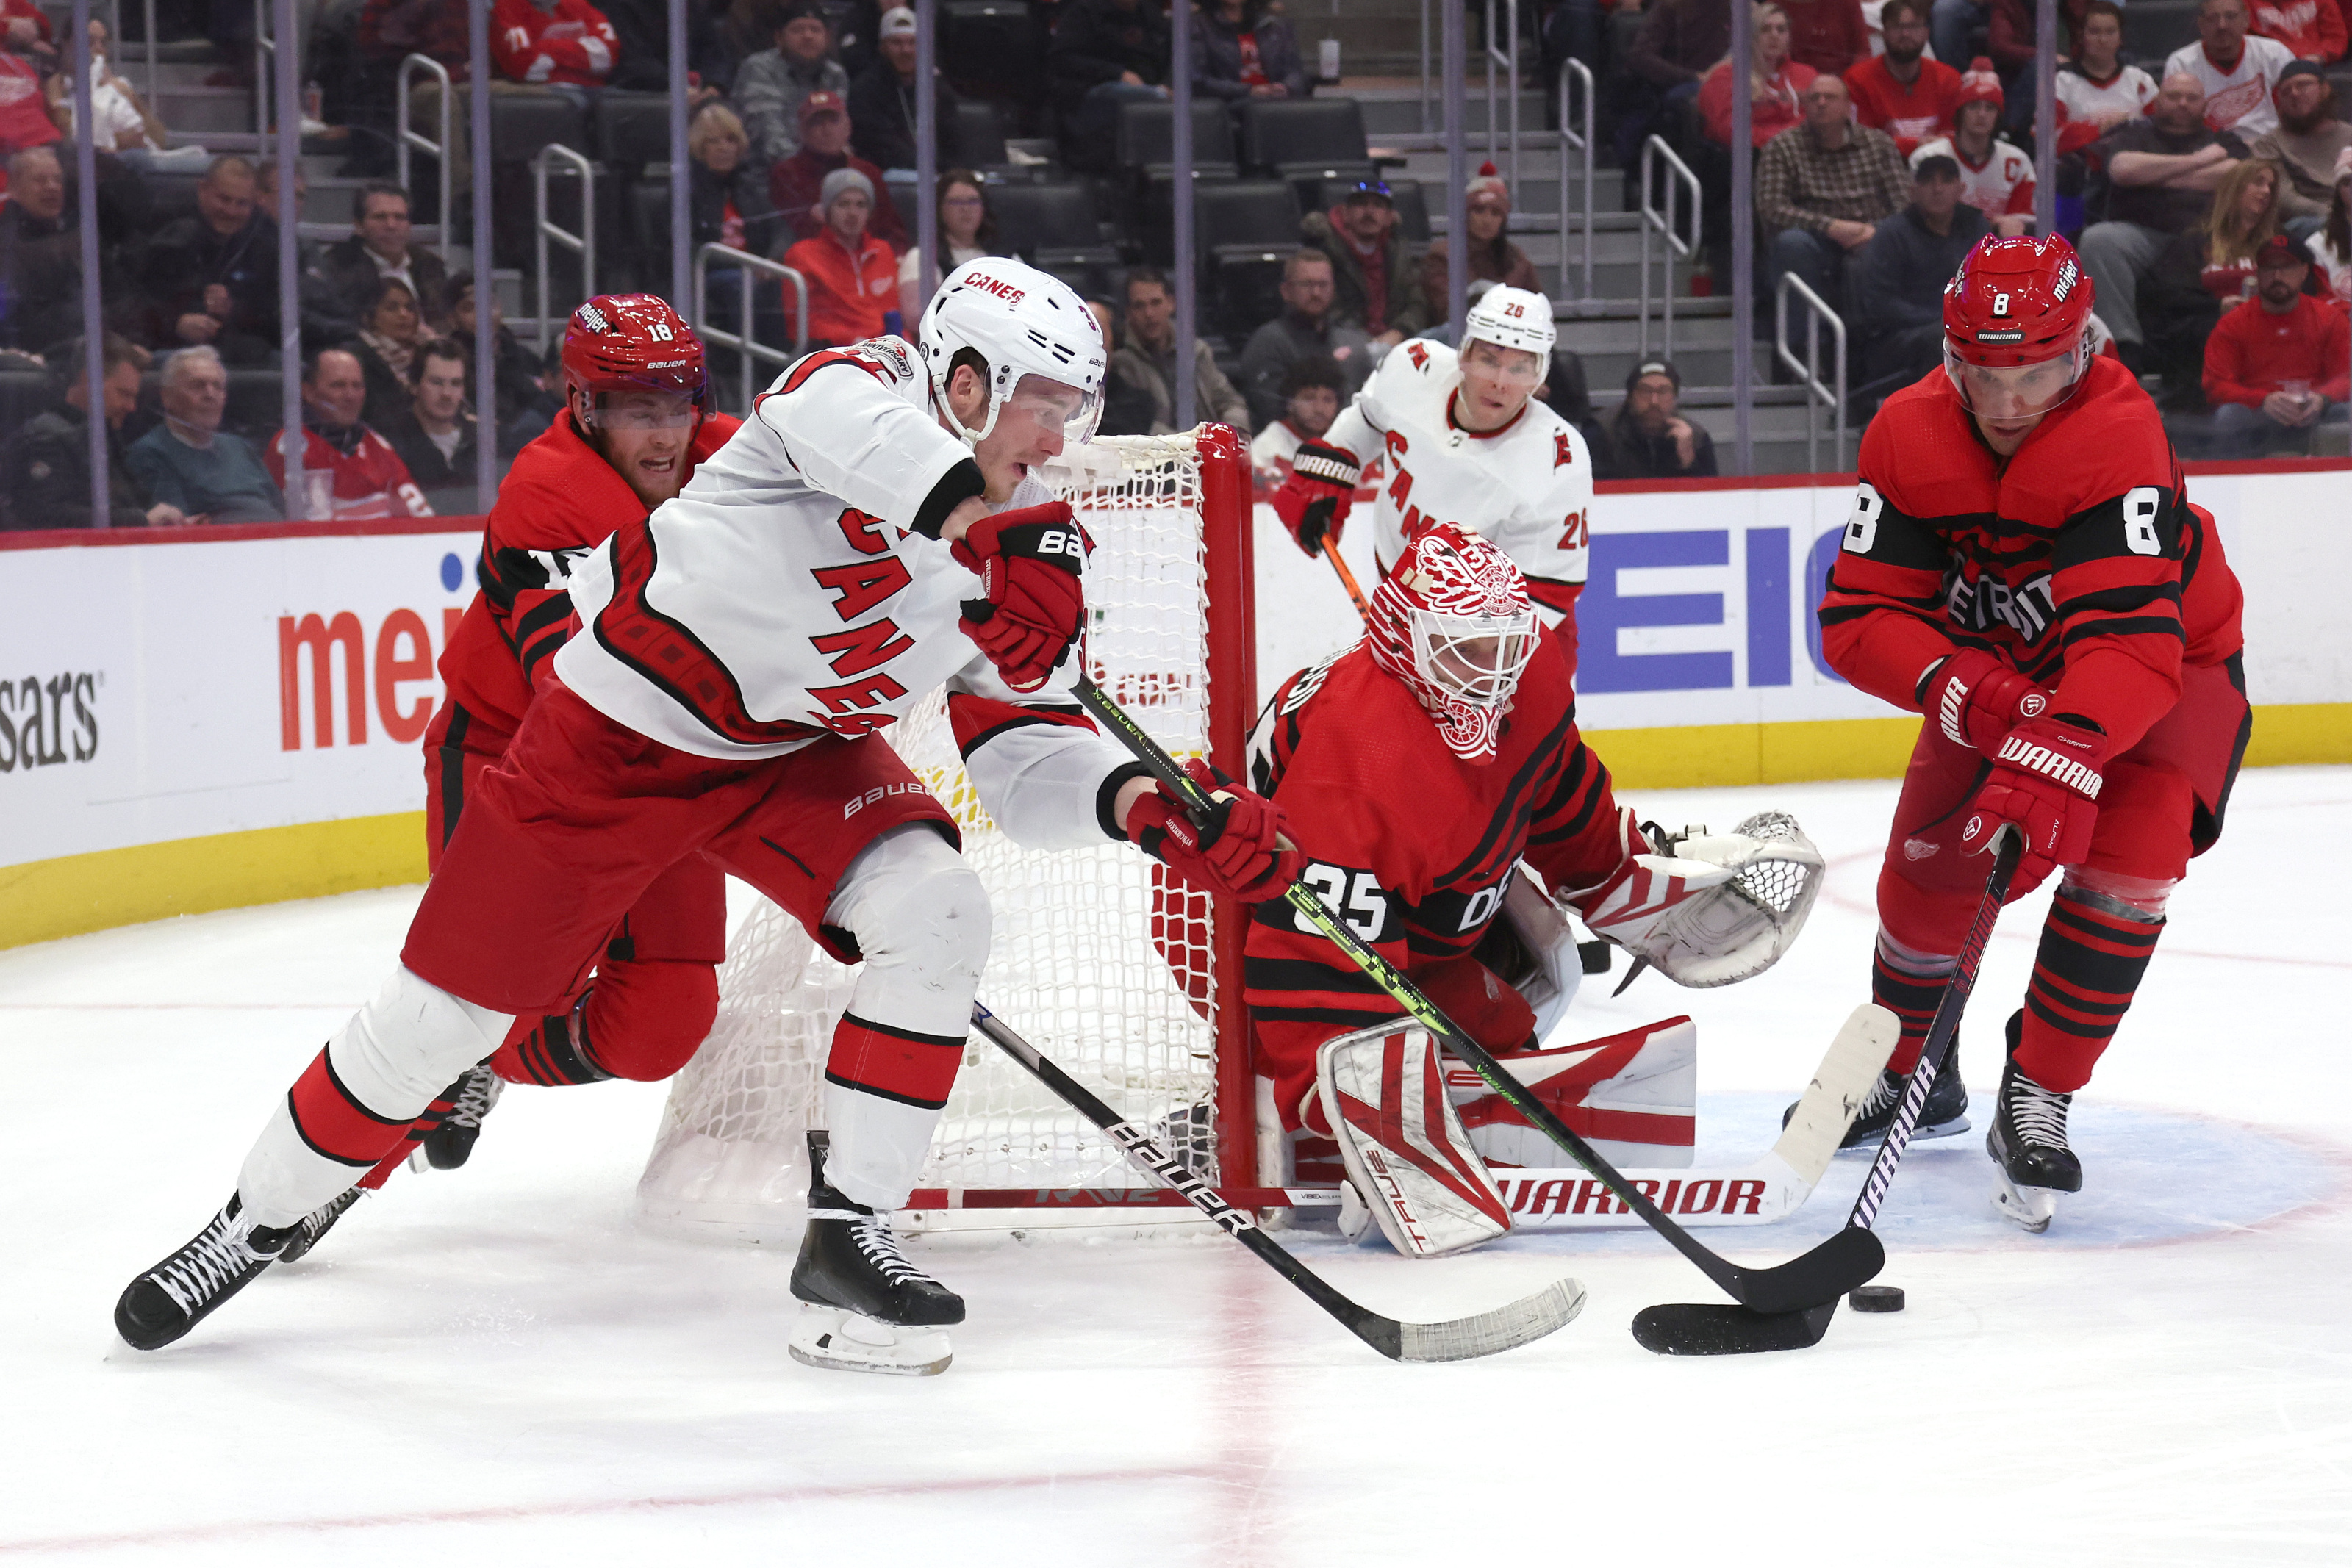 Andrei Svechnikov out for the season, will undergo knee surgery